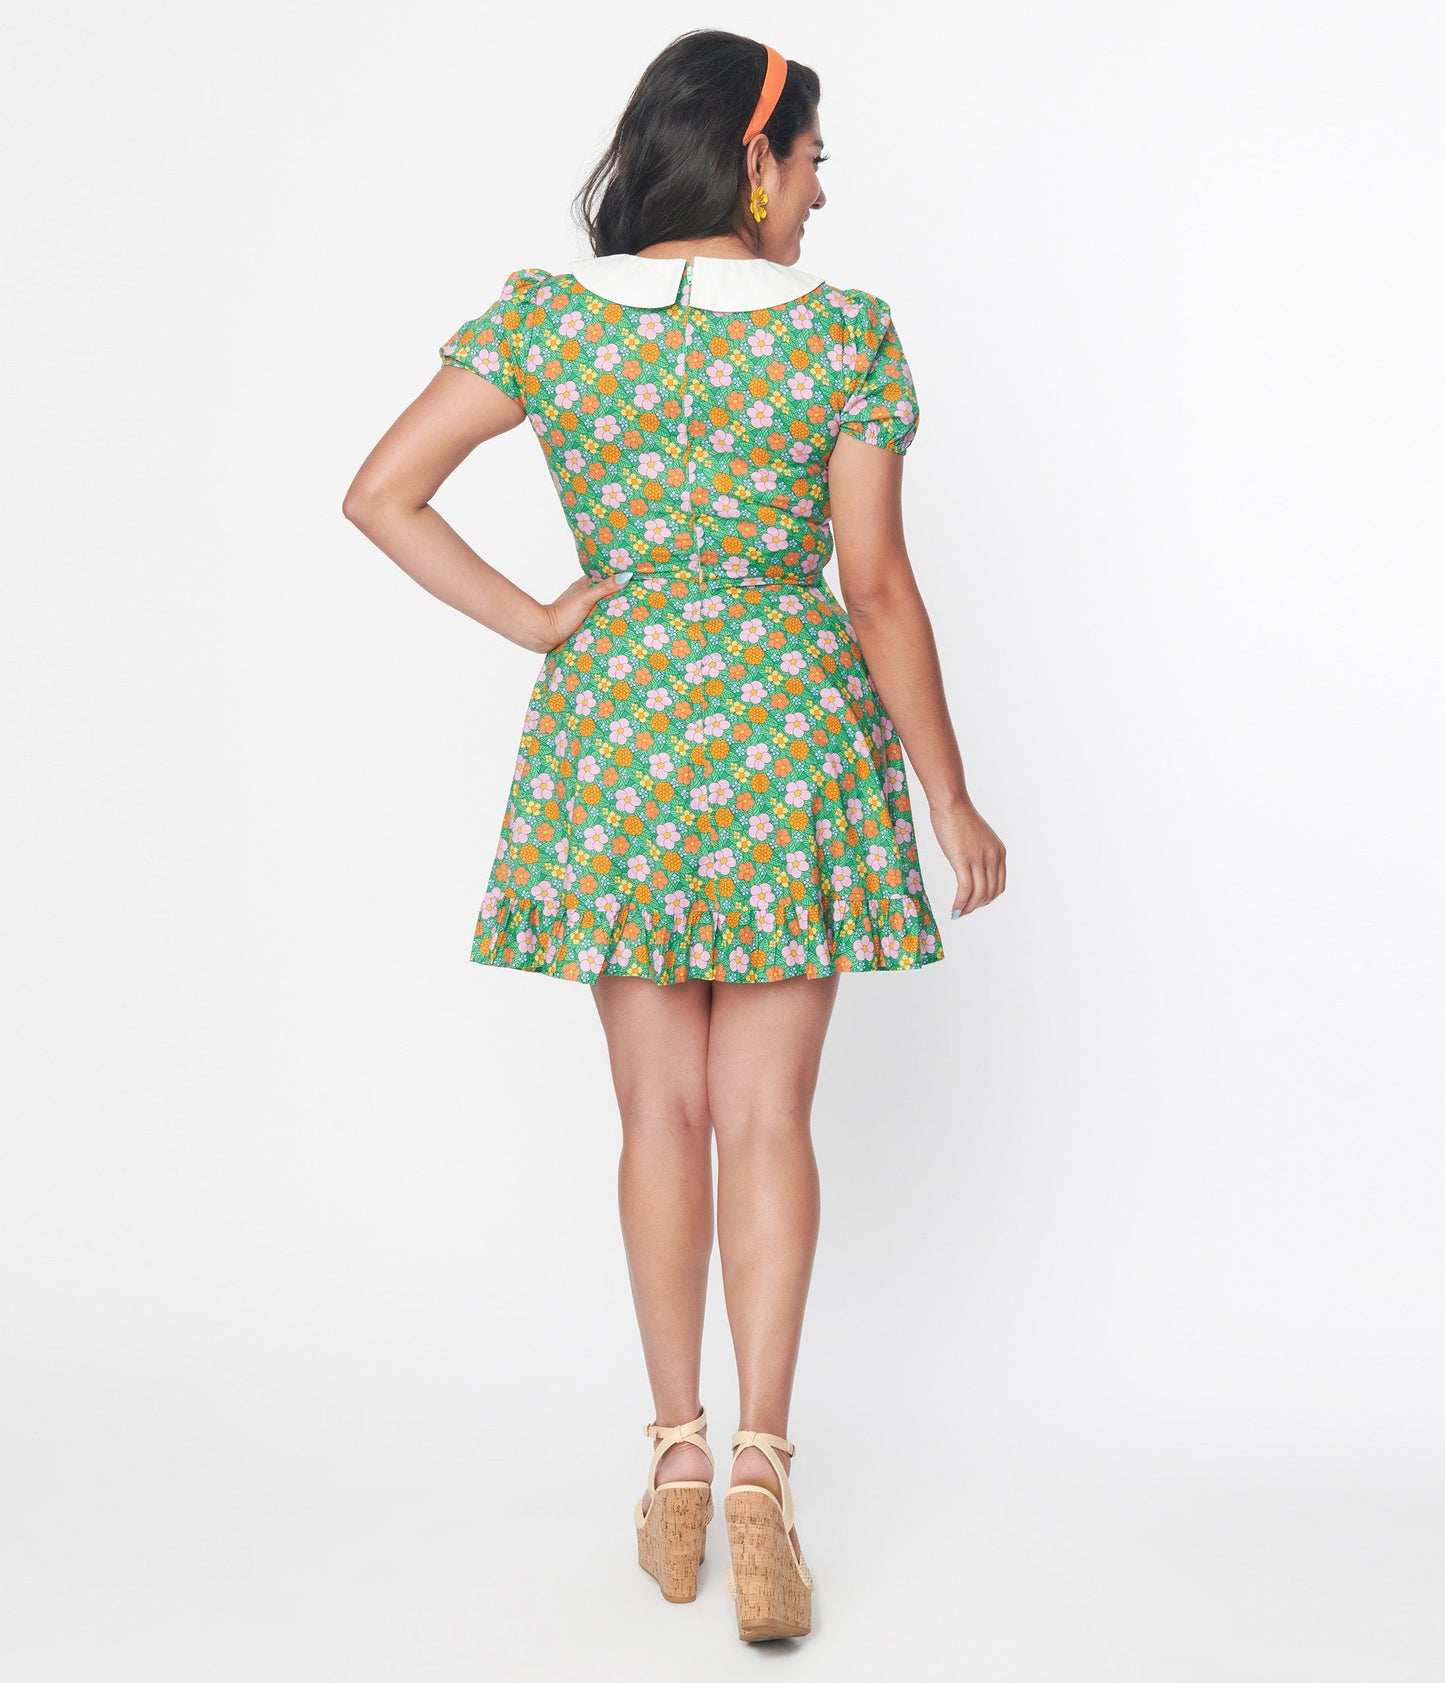 Smak Parlour 1960s Green Floral Smocked Fit & Flare Dress - Unique Vintage - Womens, DRESSES, FIT AND FLARE